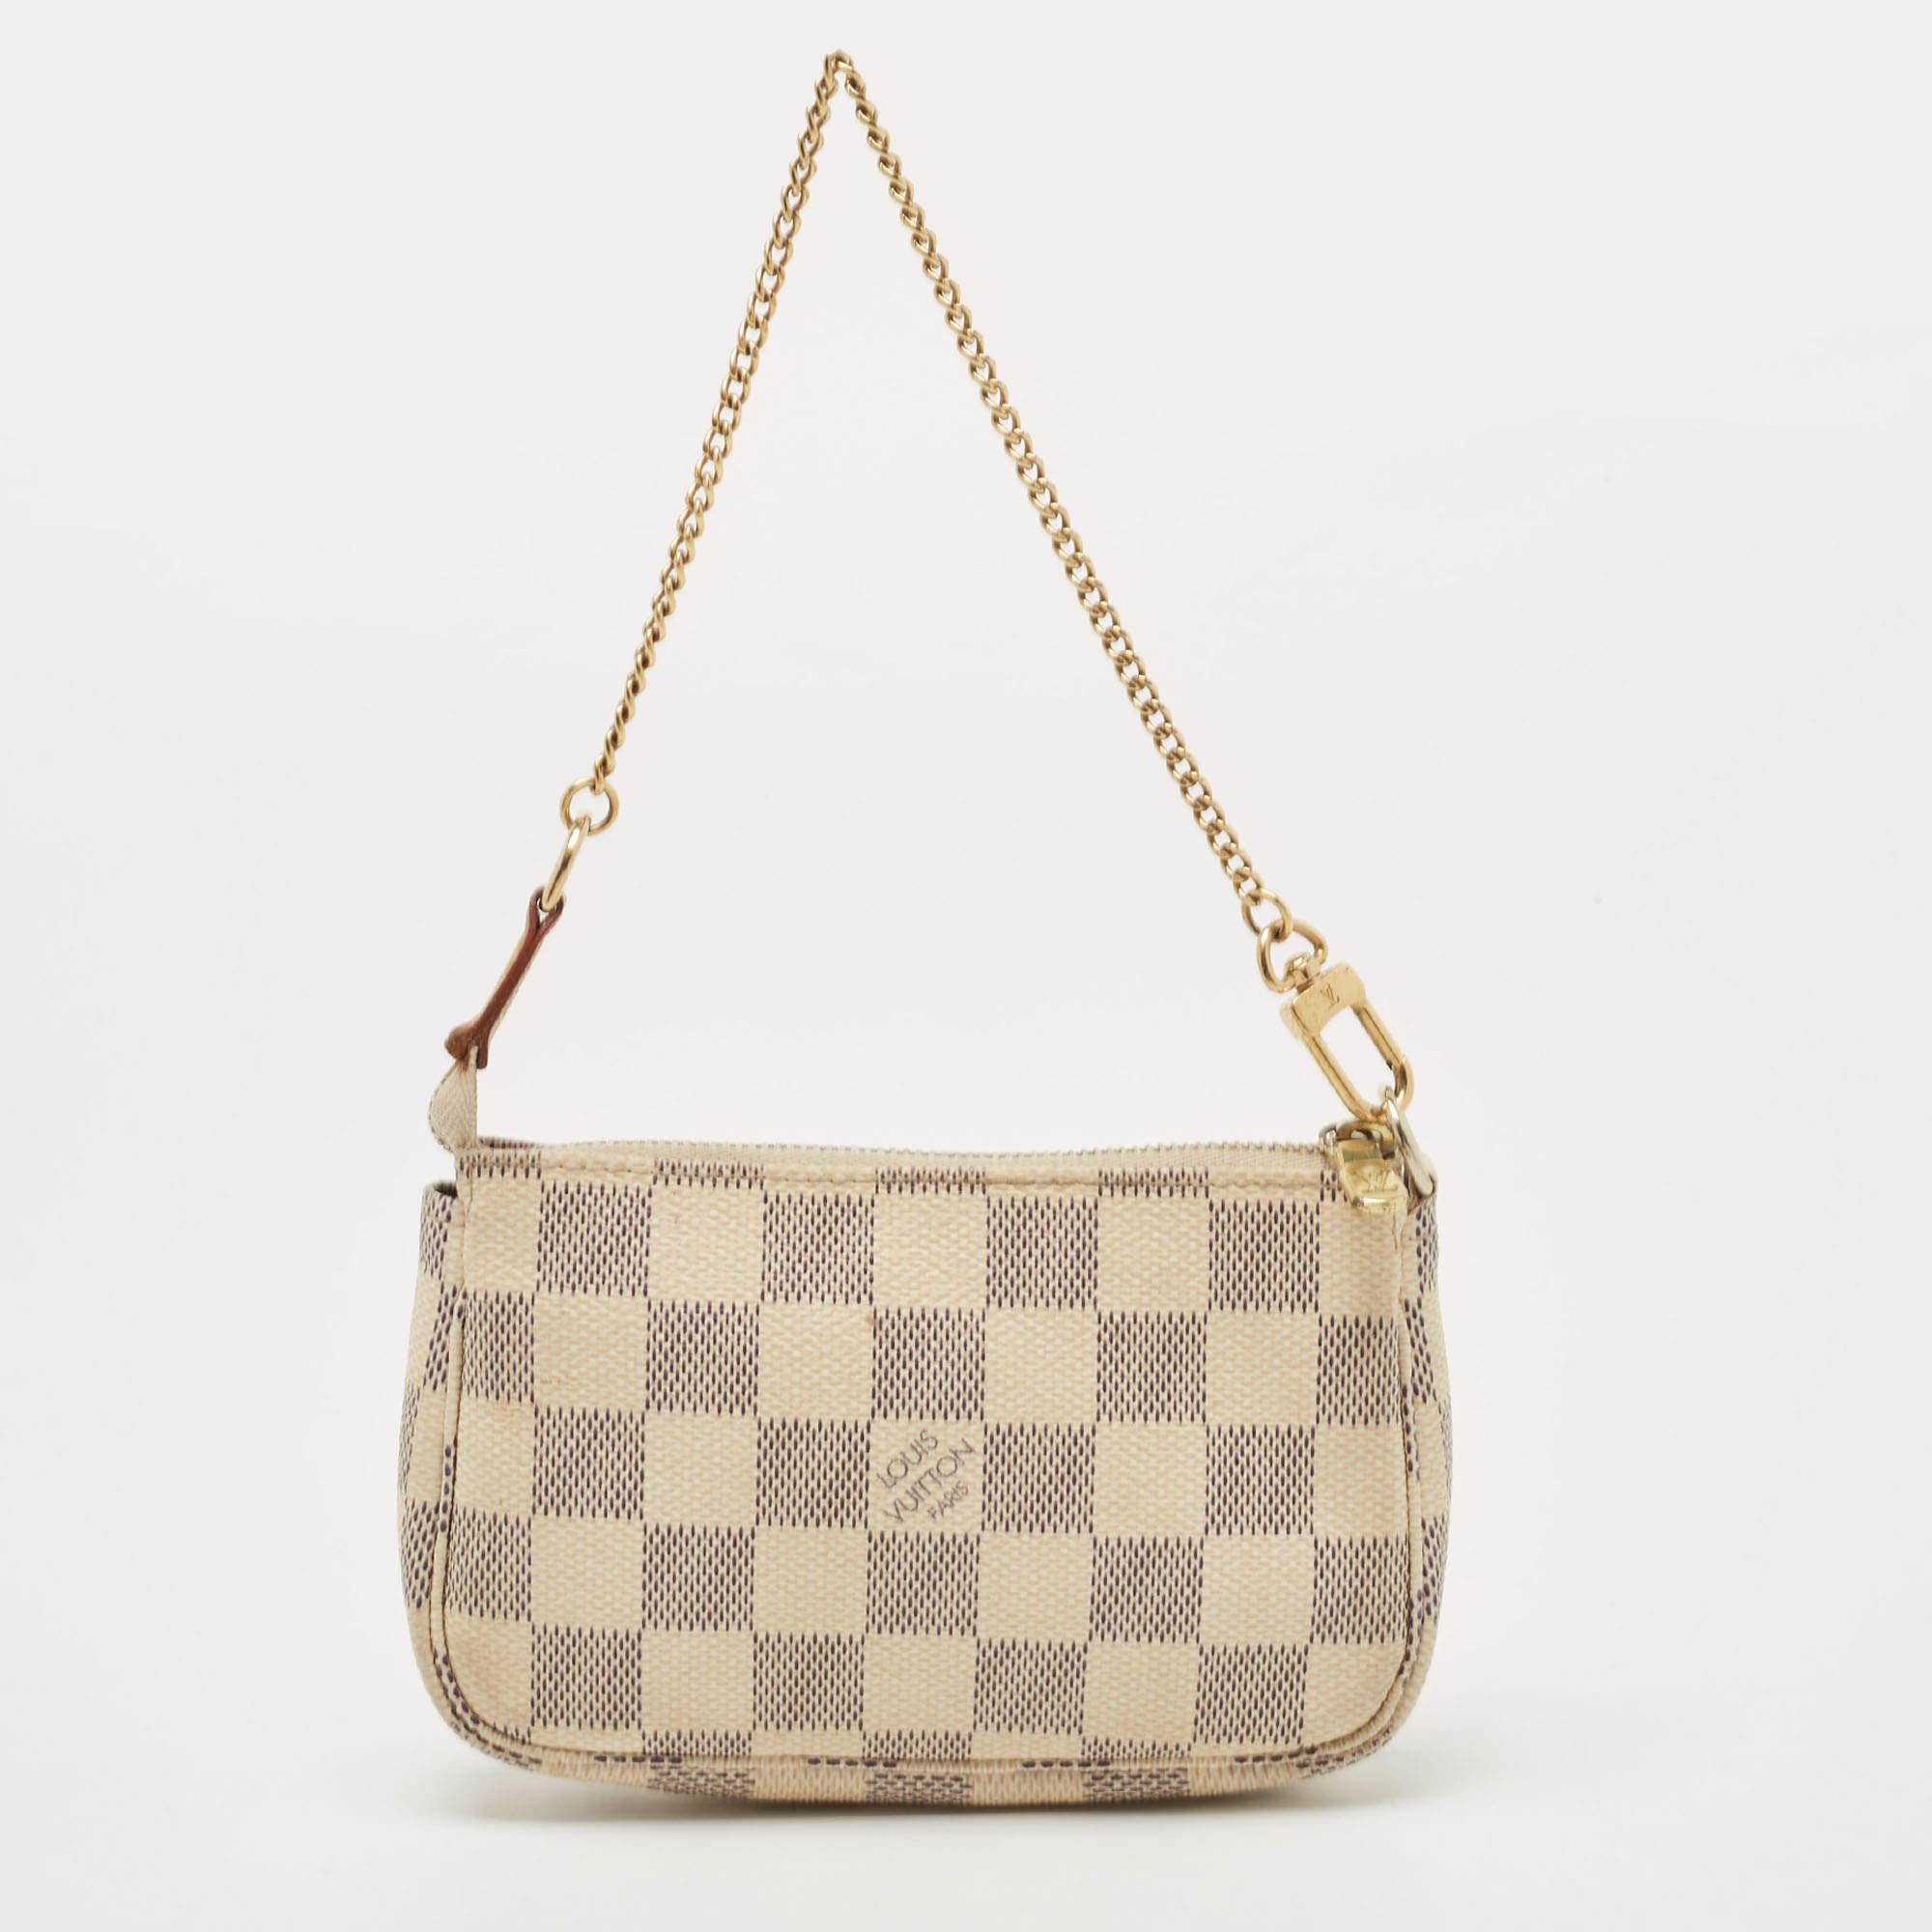 Perfect for conveniently housing your essentials in one place, this Louis Vuitton accessory is a worthy investment. It has notable details and offers a look of luxury.

